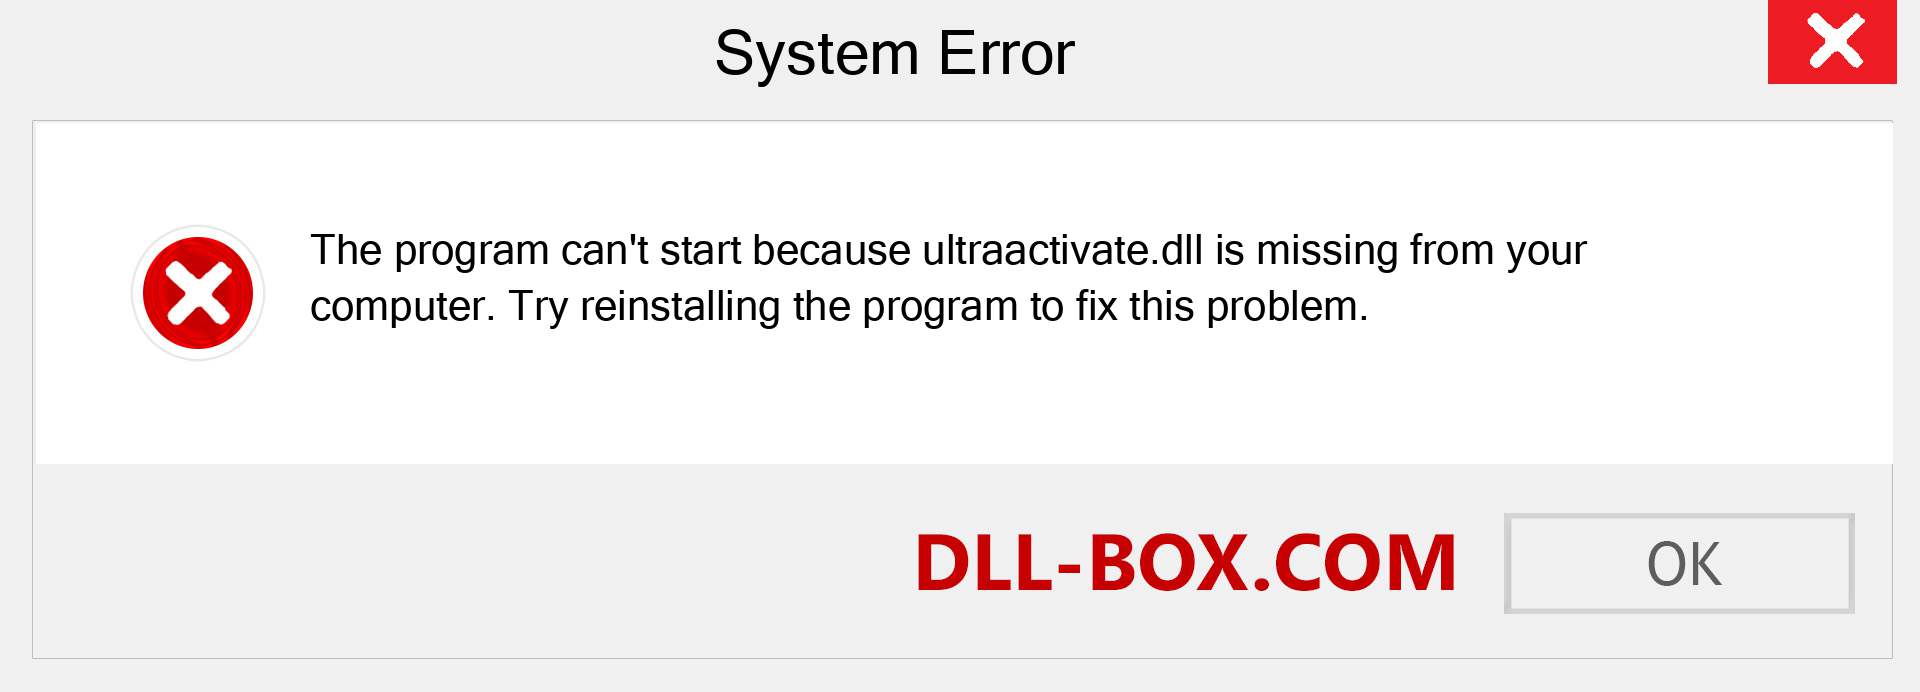  ultraactivate.dll file is missing?. Download for Windows 7, 8, 10 - Fix  ultraactivate dll Missing Error on Windows, photos, images